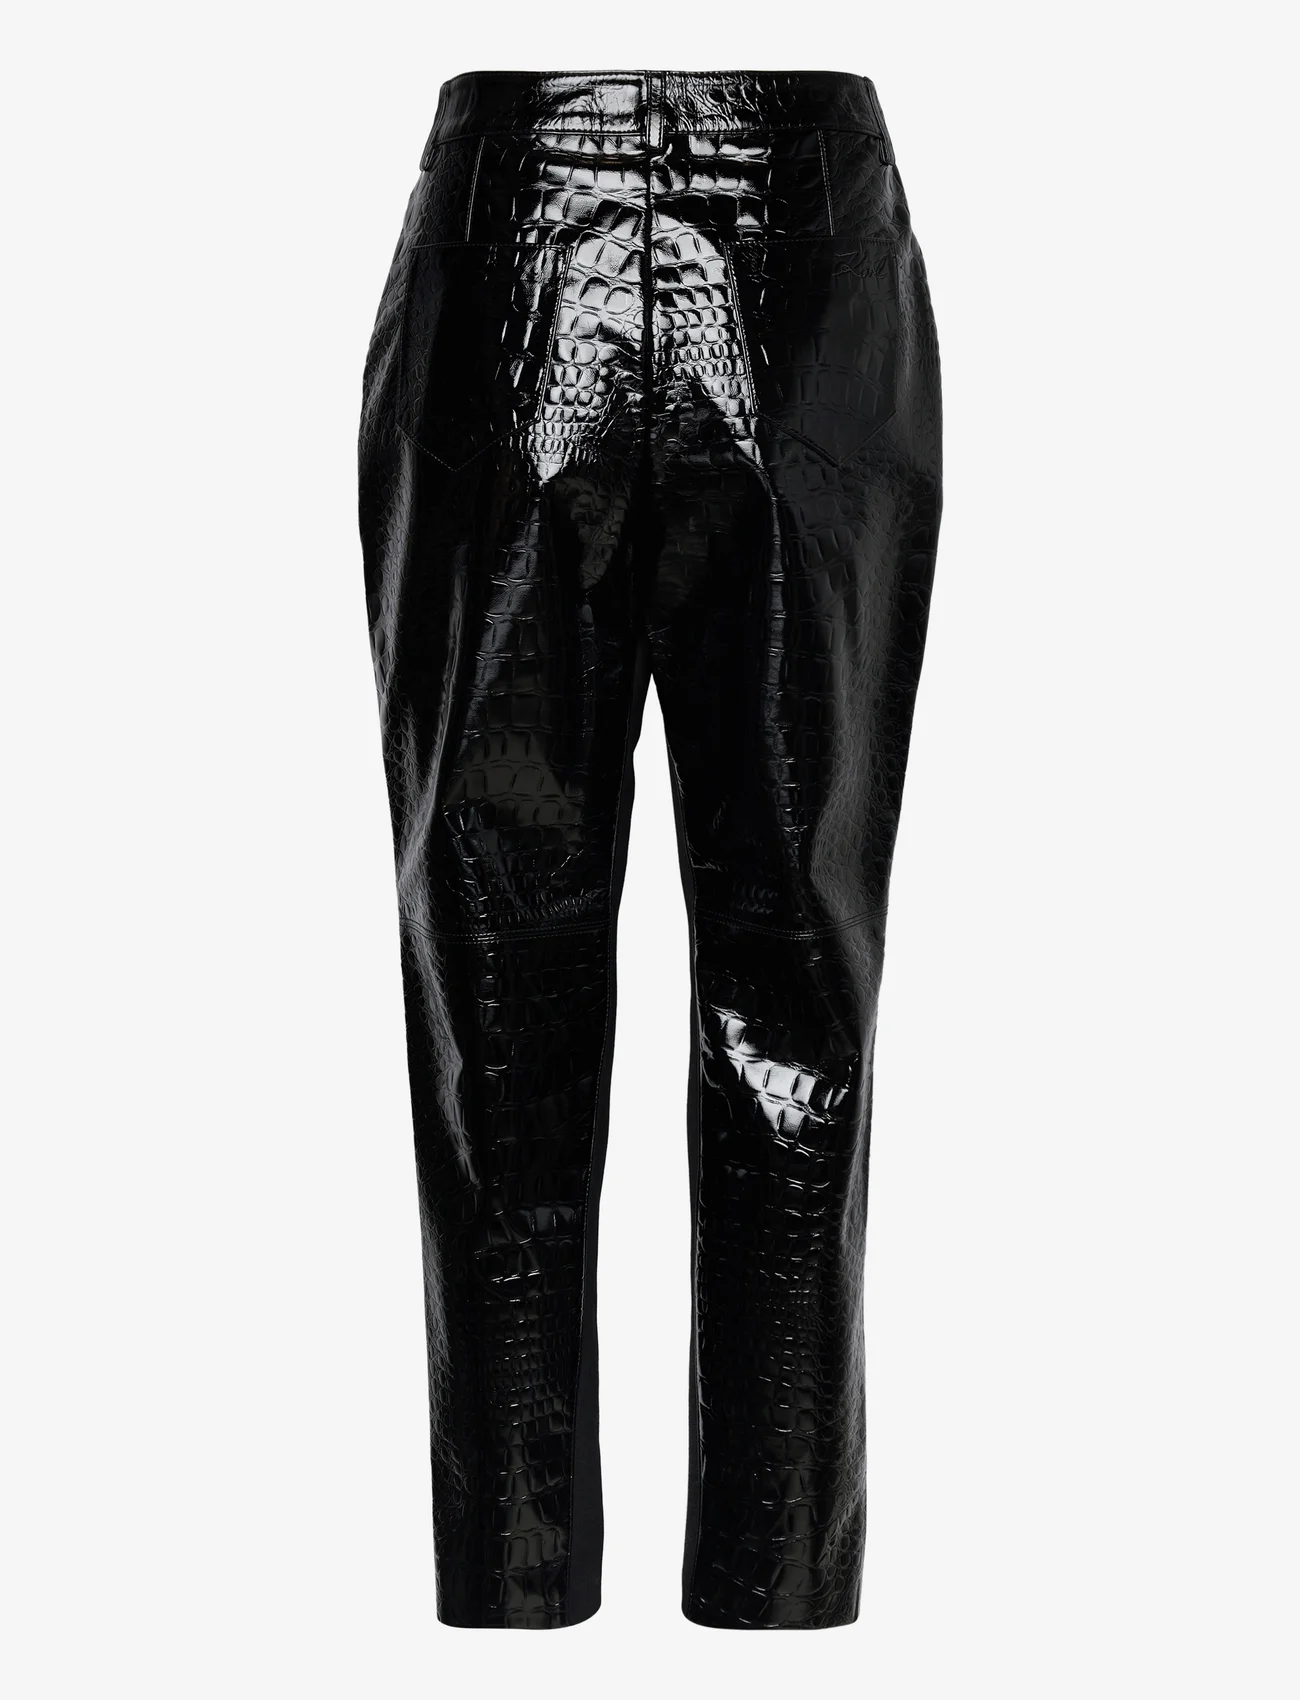 Karl Lagerfeld - faux croc patent leather pants - party wear at outlet prices - black - 1